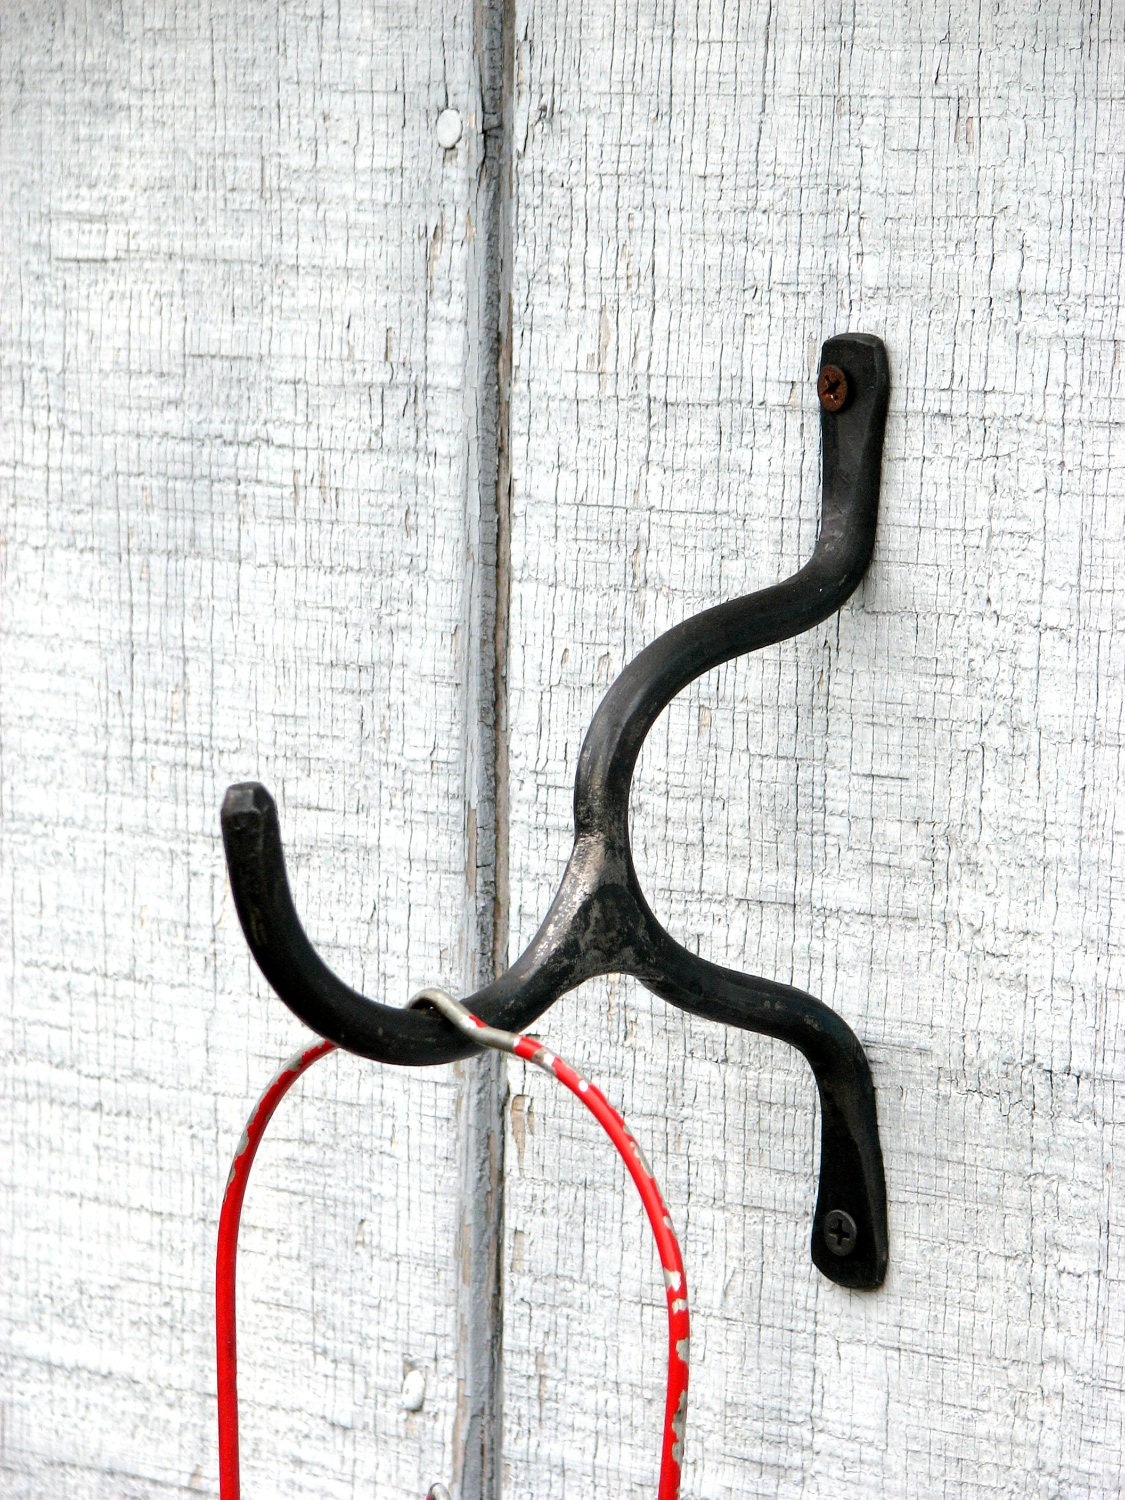 Hand Forged Iron Plant, Lantern or Wind Chime Hook by VinTin - VinTin